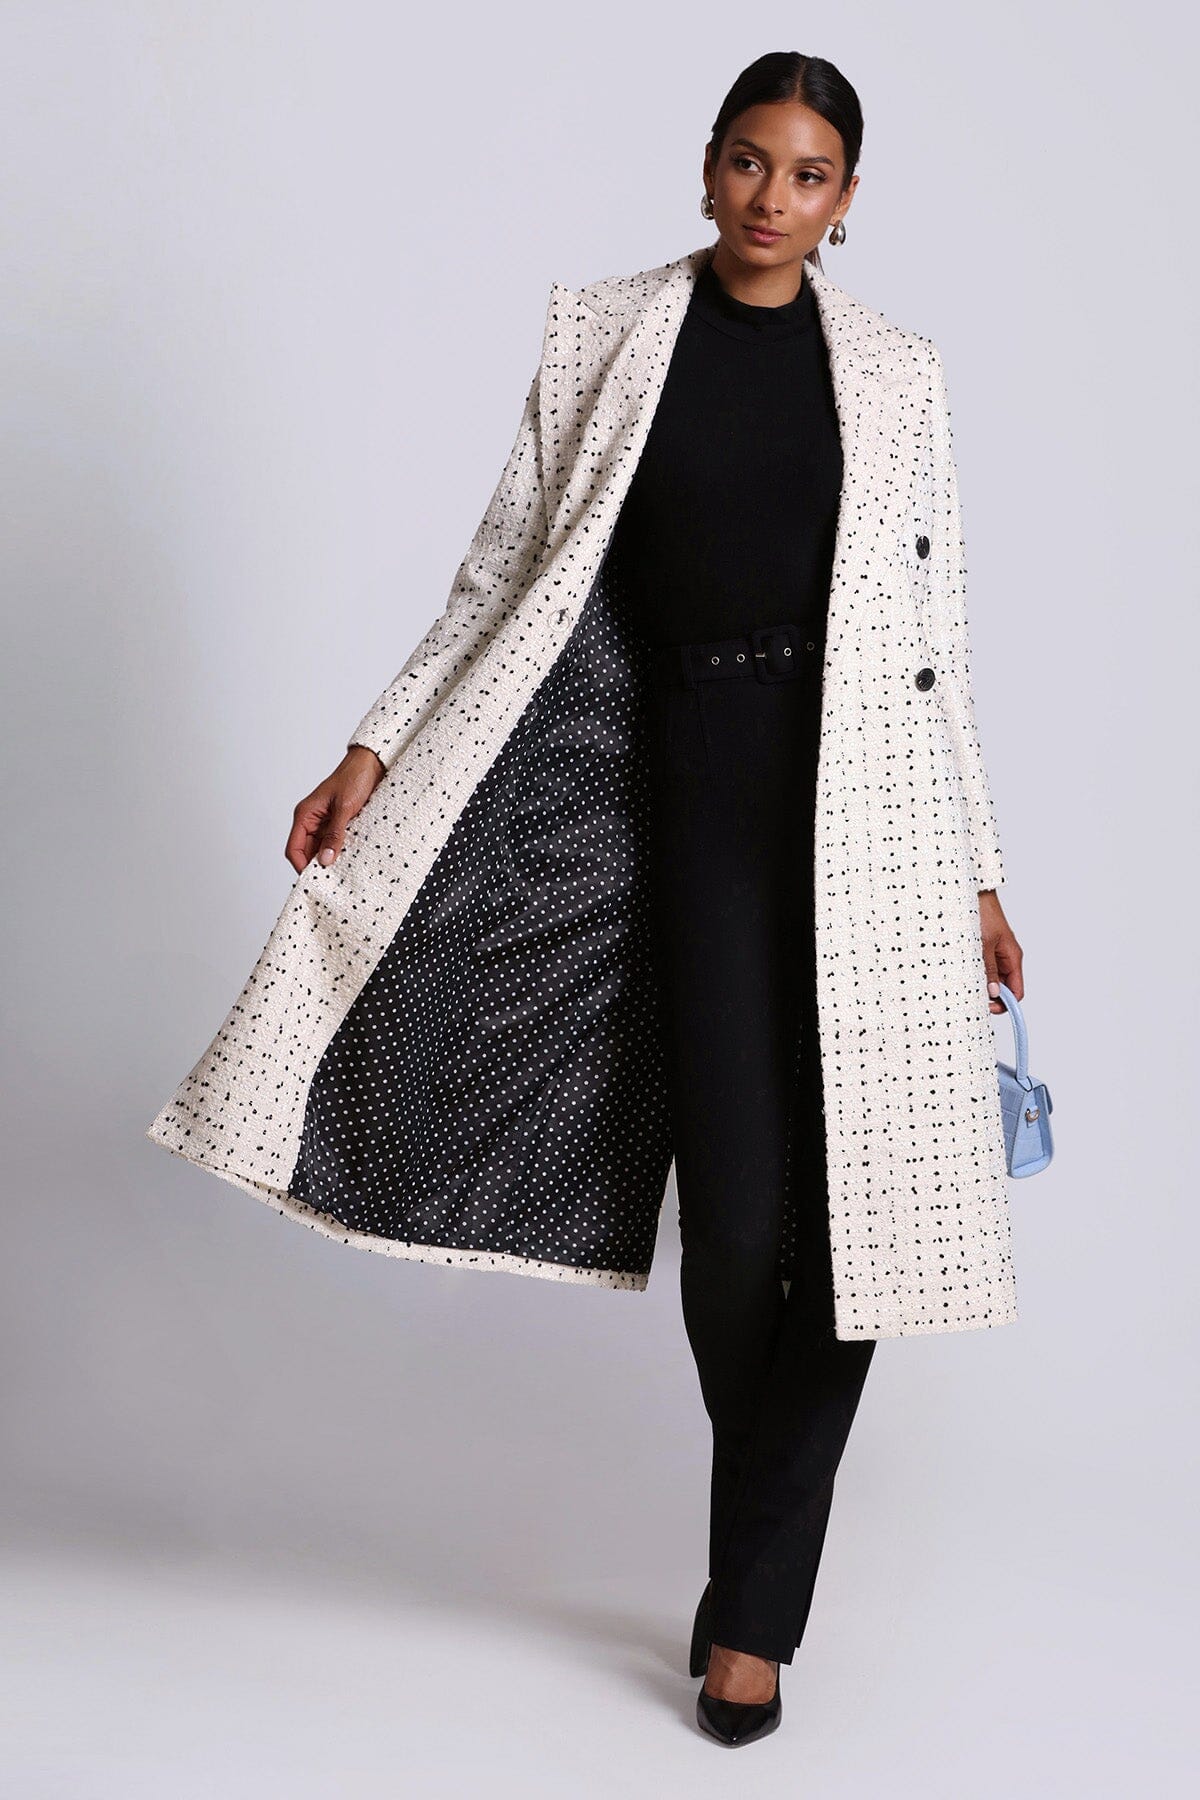 Black and white tweed tailored double breasted longline coat jacket - women's figure flattering quiet luxury coats outerwear for fall 2023 fashion